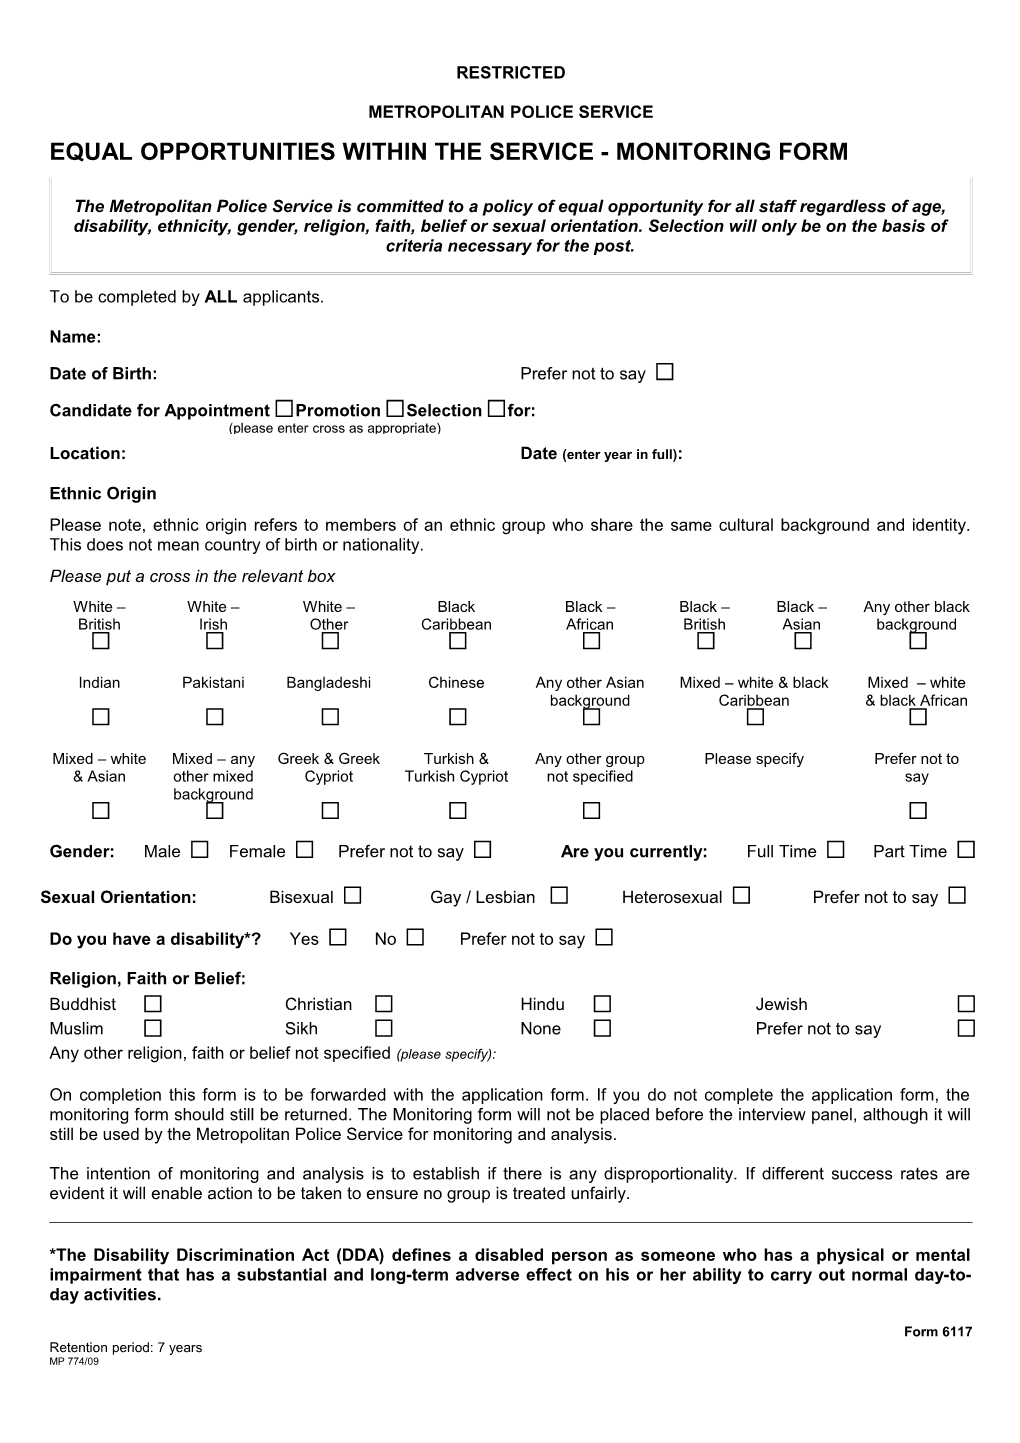 Form 6117 - Equal Opportunities Within the Service - Monitoring Form